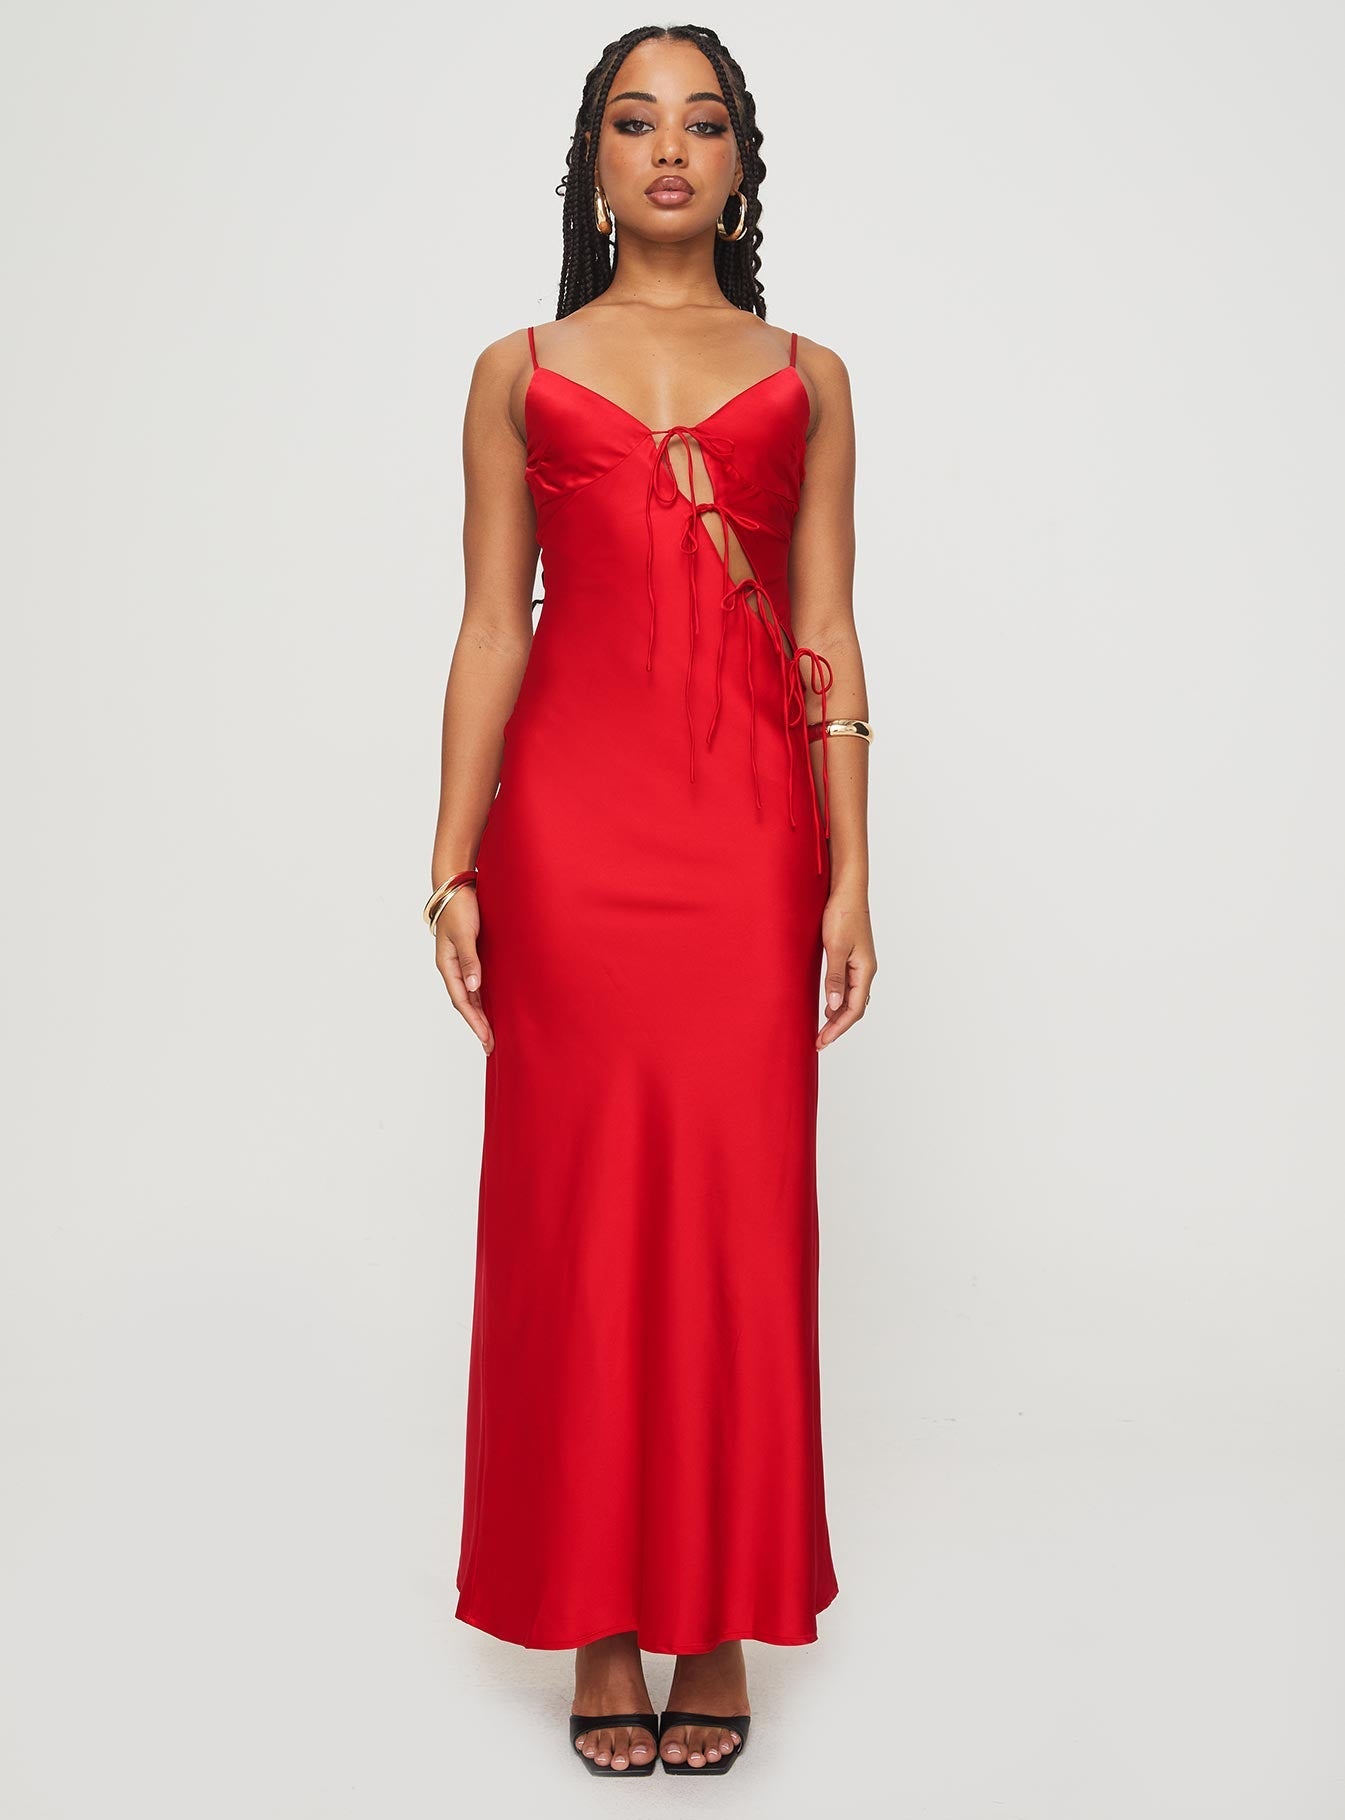 Shop Formal Dress Red Dress Maxi Girl A About